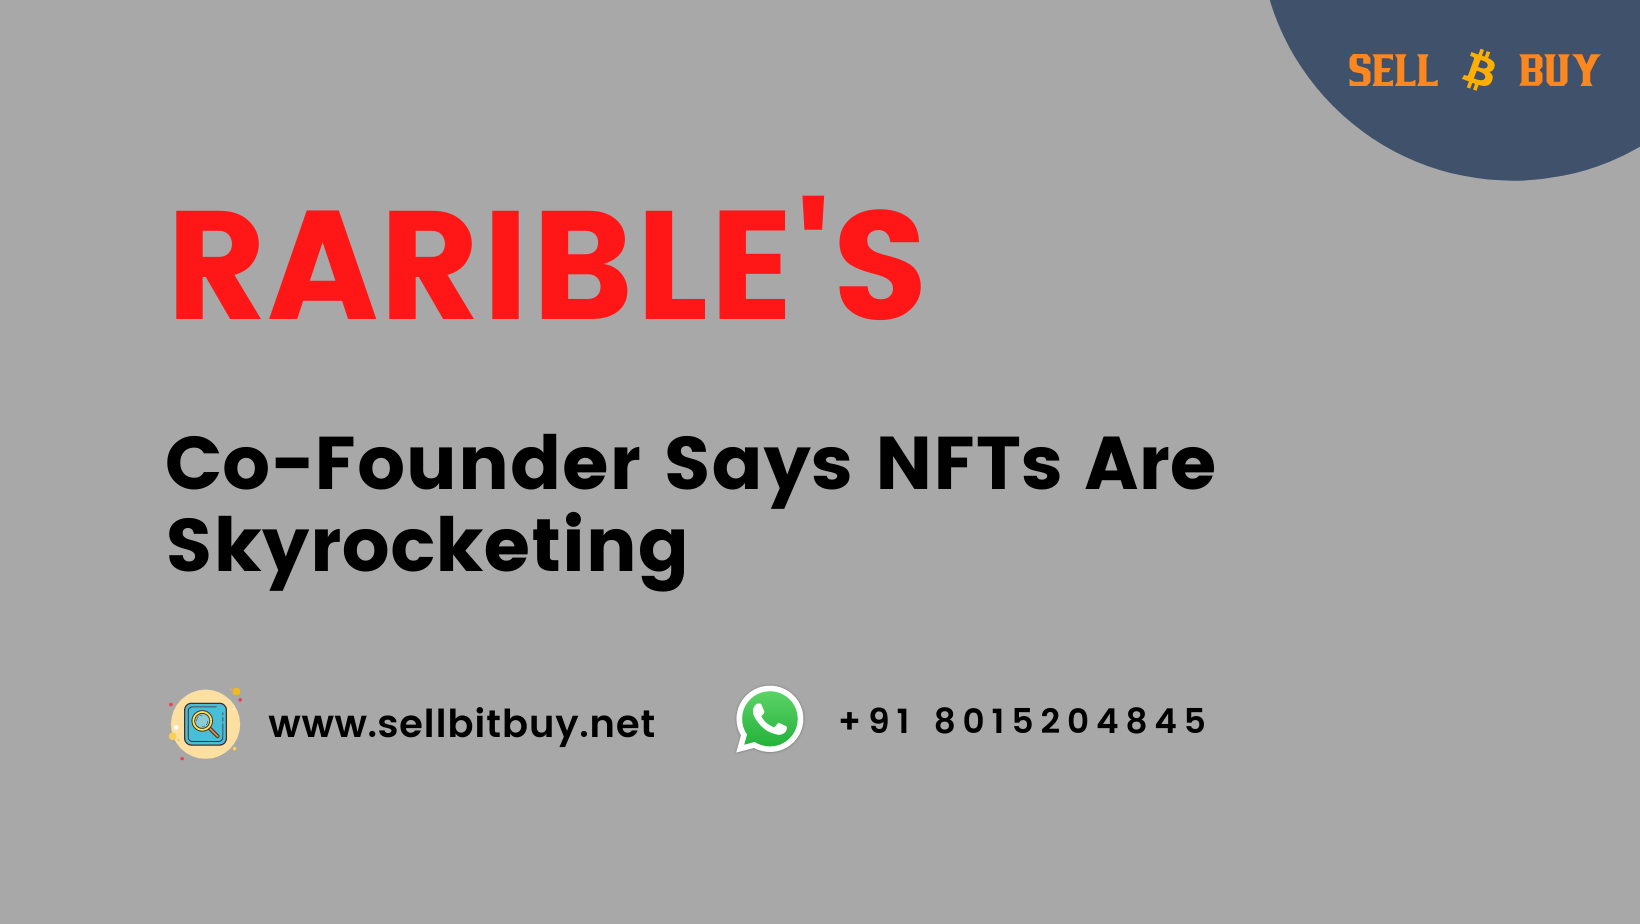 Article about Rarible Co-Founder Says NFTs Are Skyrocketing